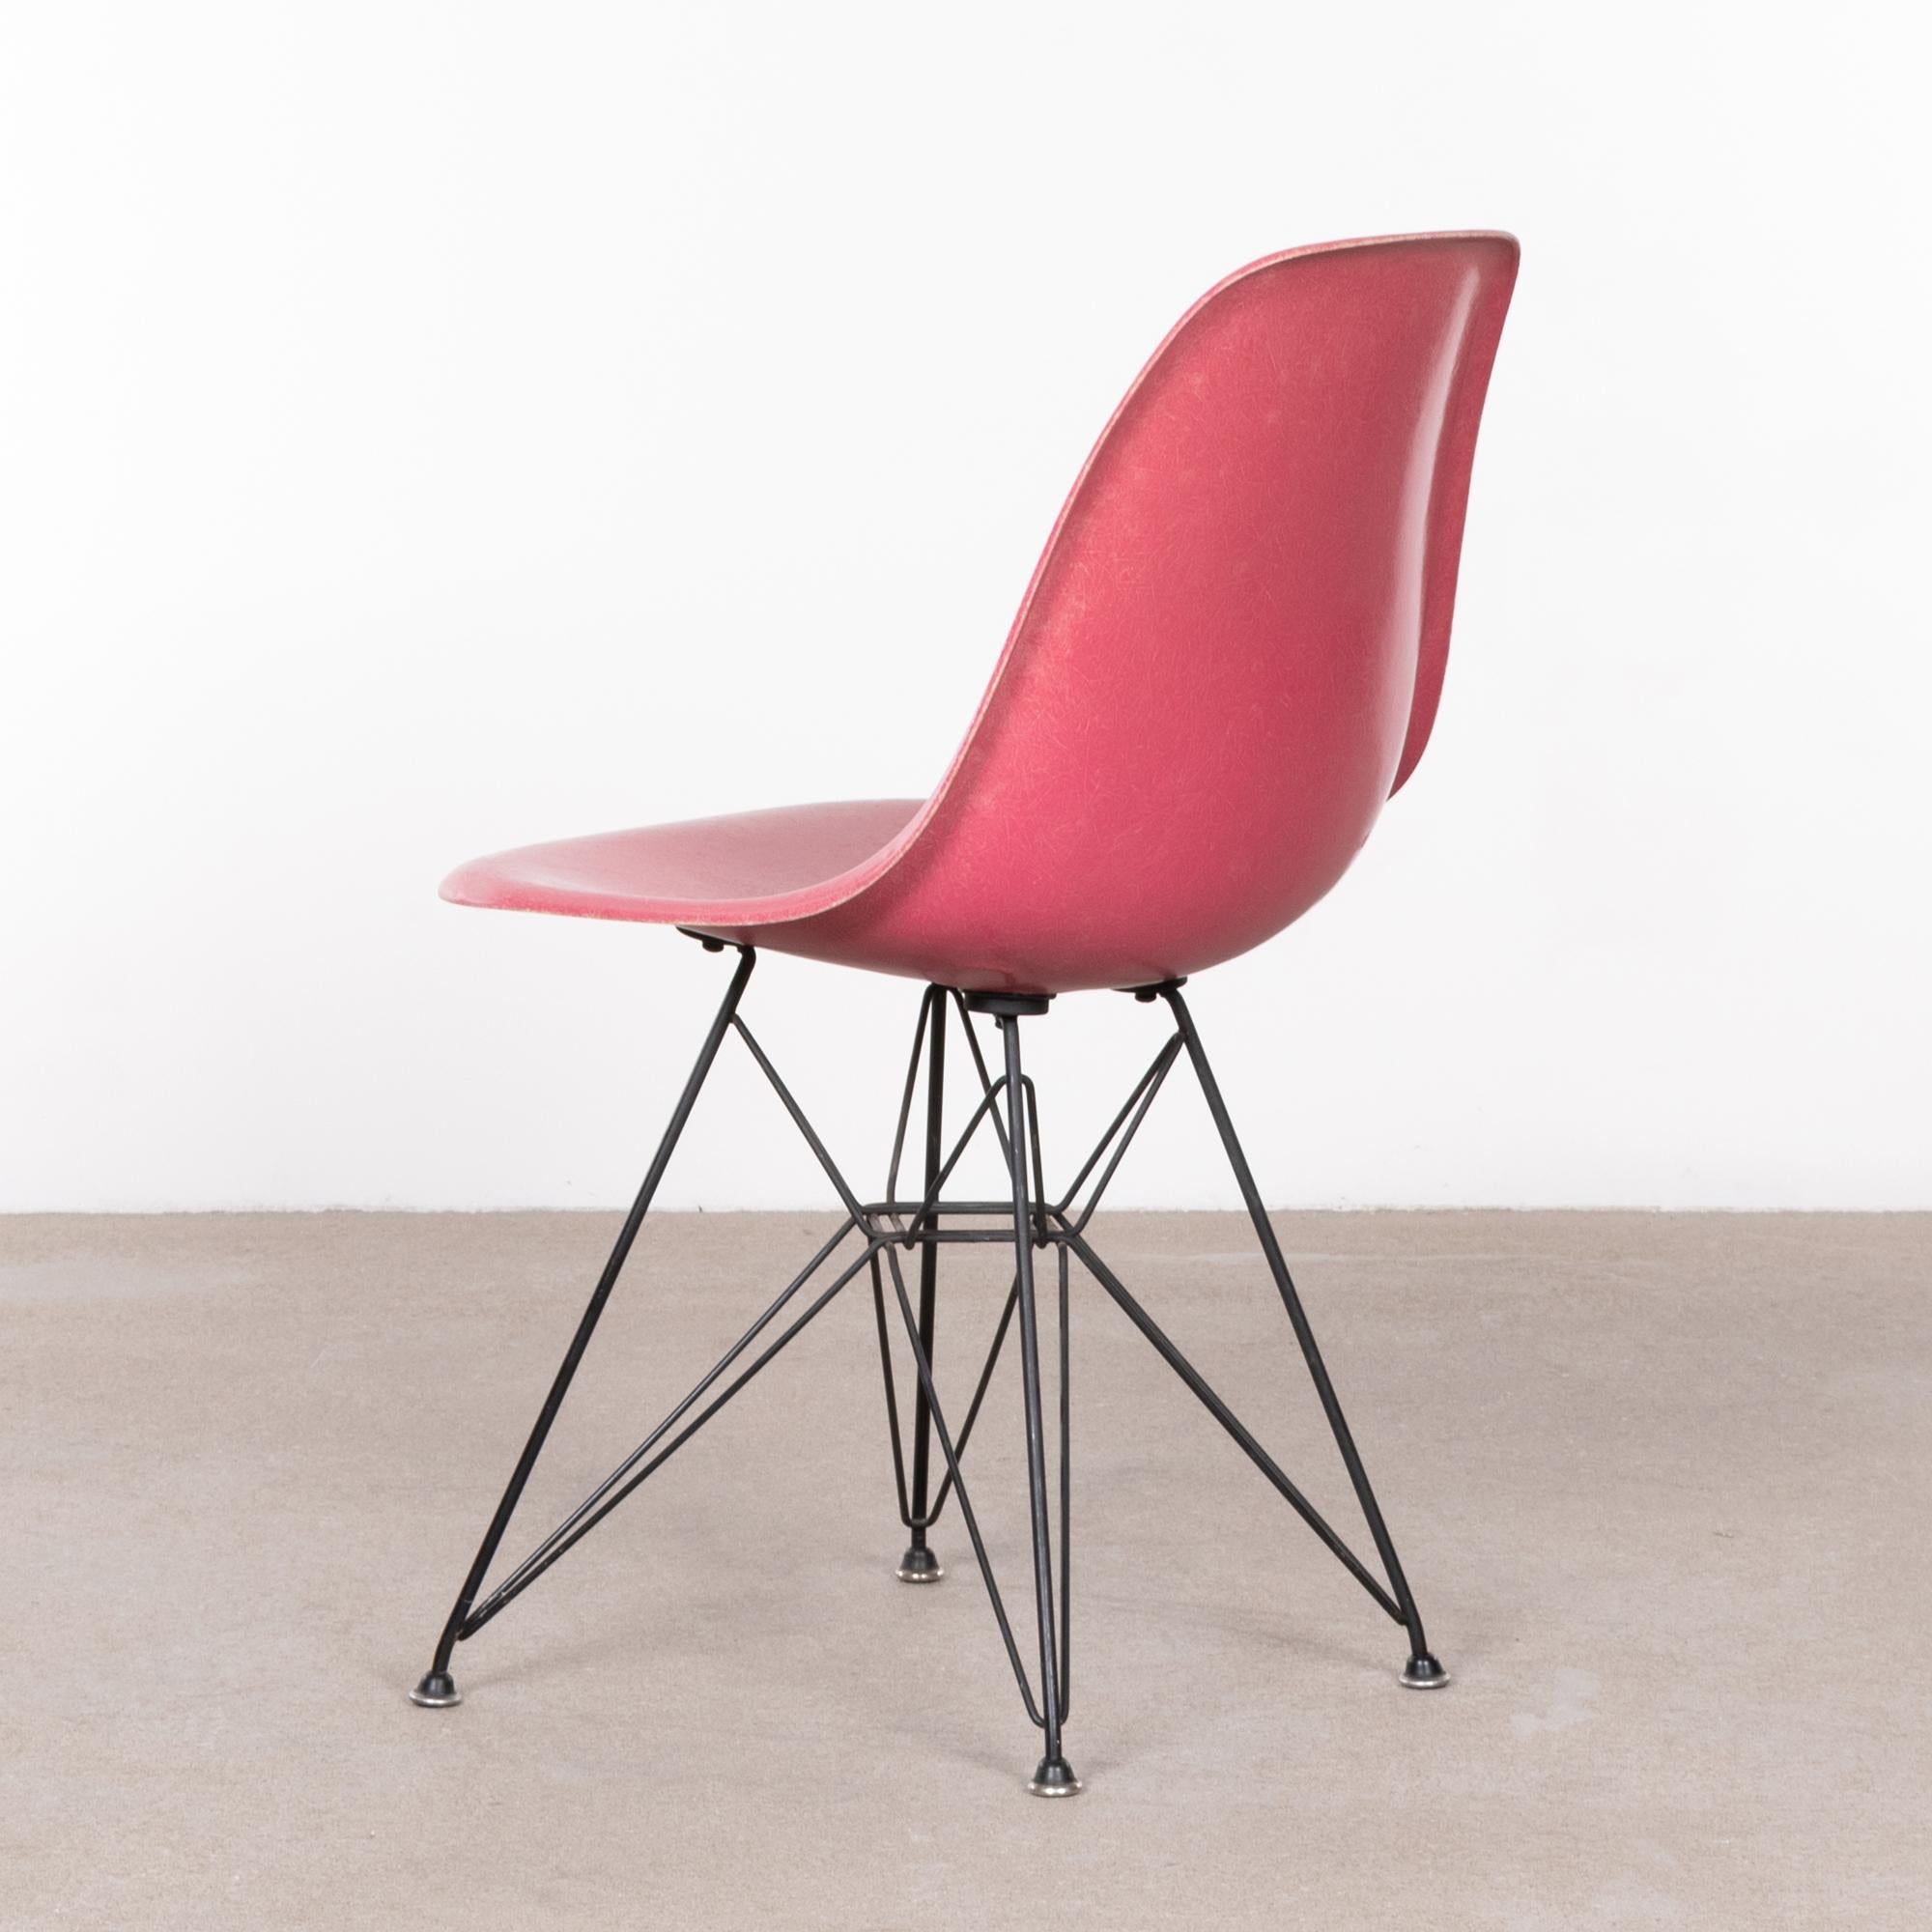 Mid-Century Modern Eames DSR Rare Pink Dining Chair Herman Miller, USA